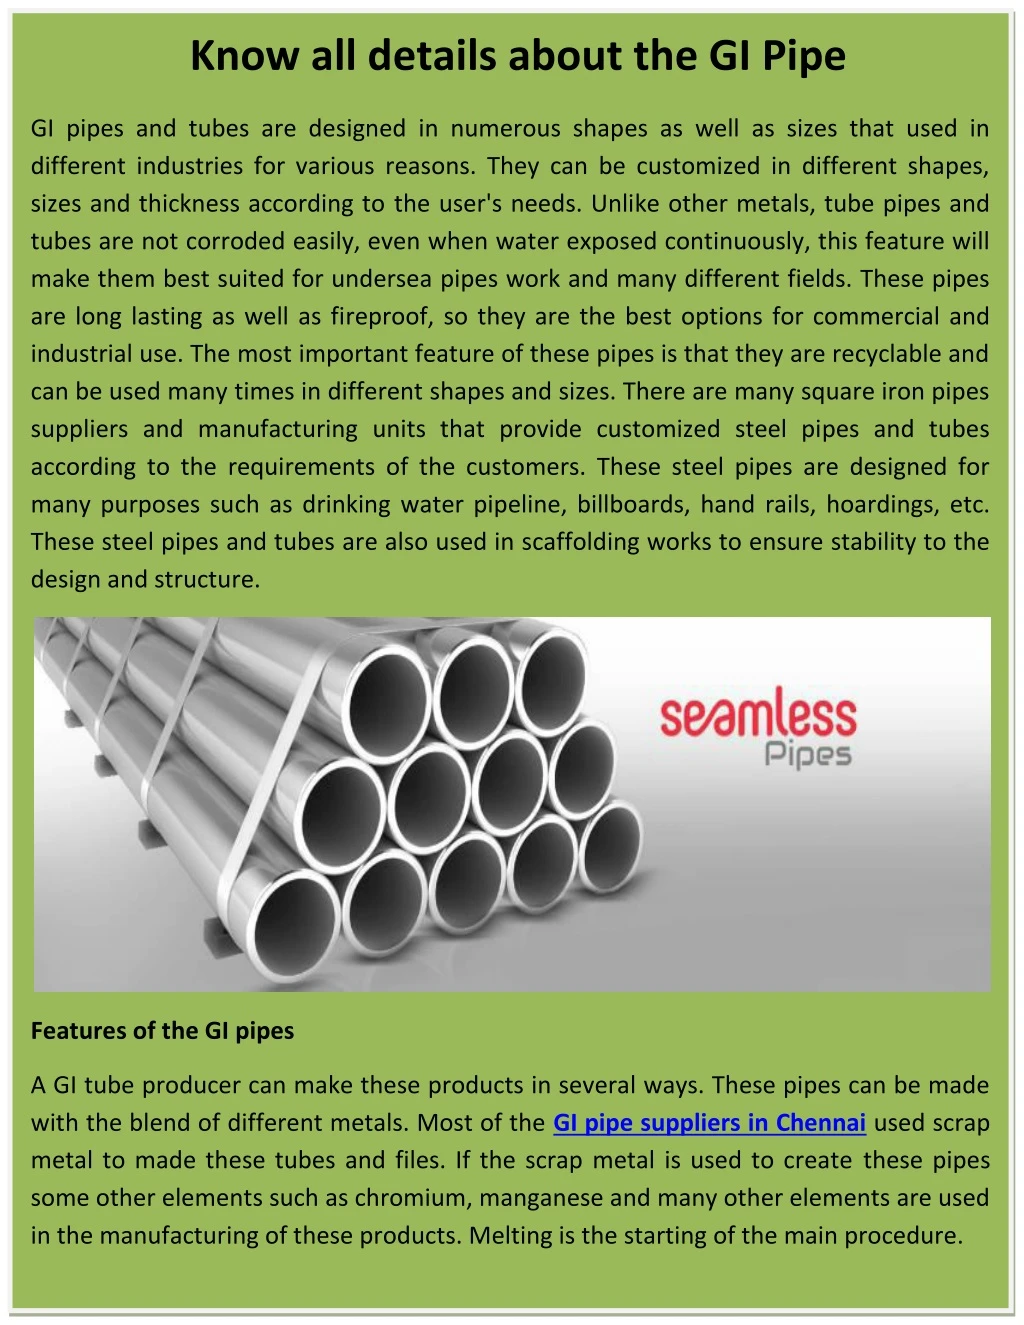 know all details about the gi pipe